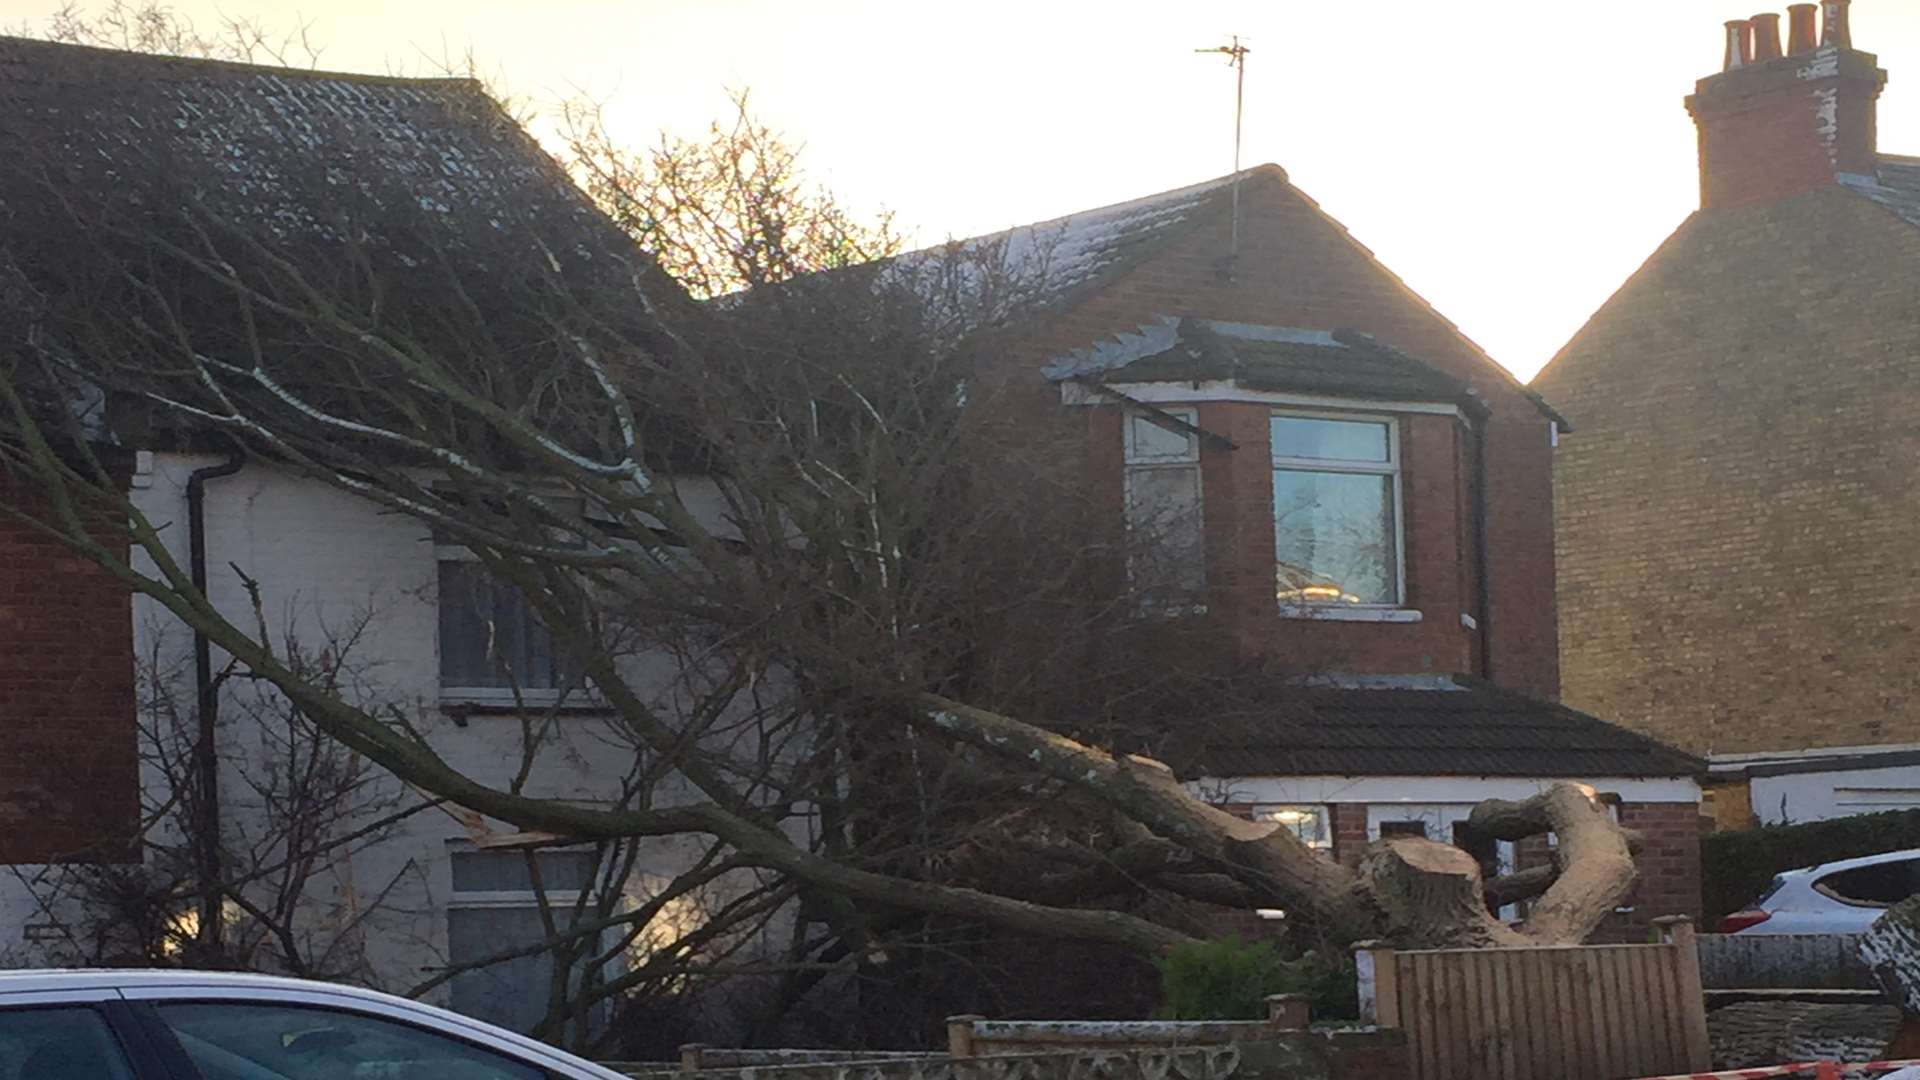 The tree fell backwards onto a house in Stanley Road.